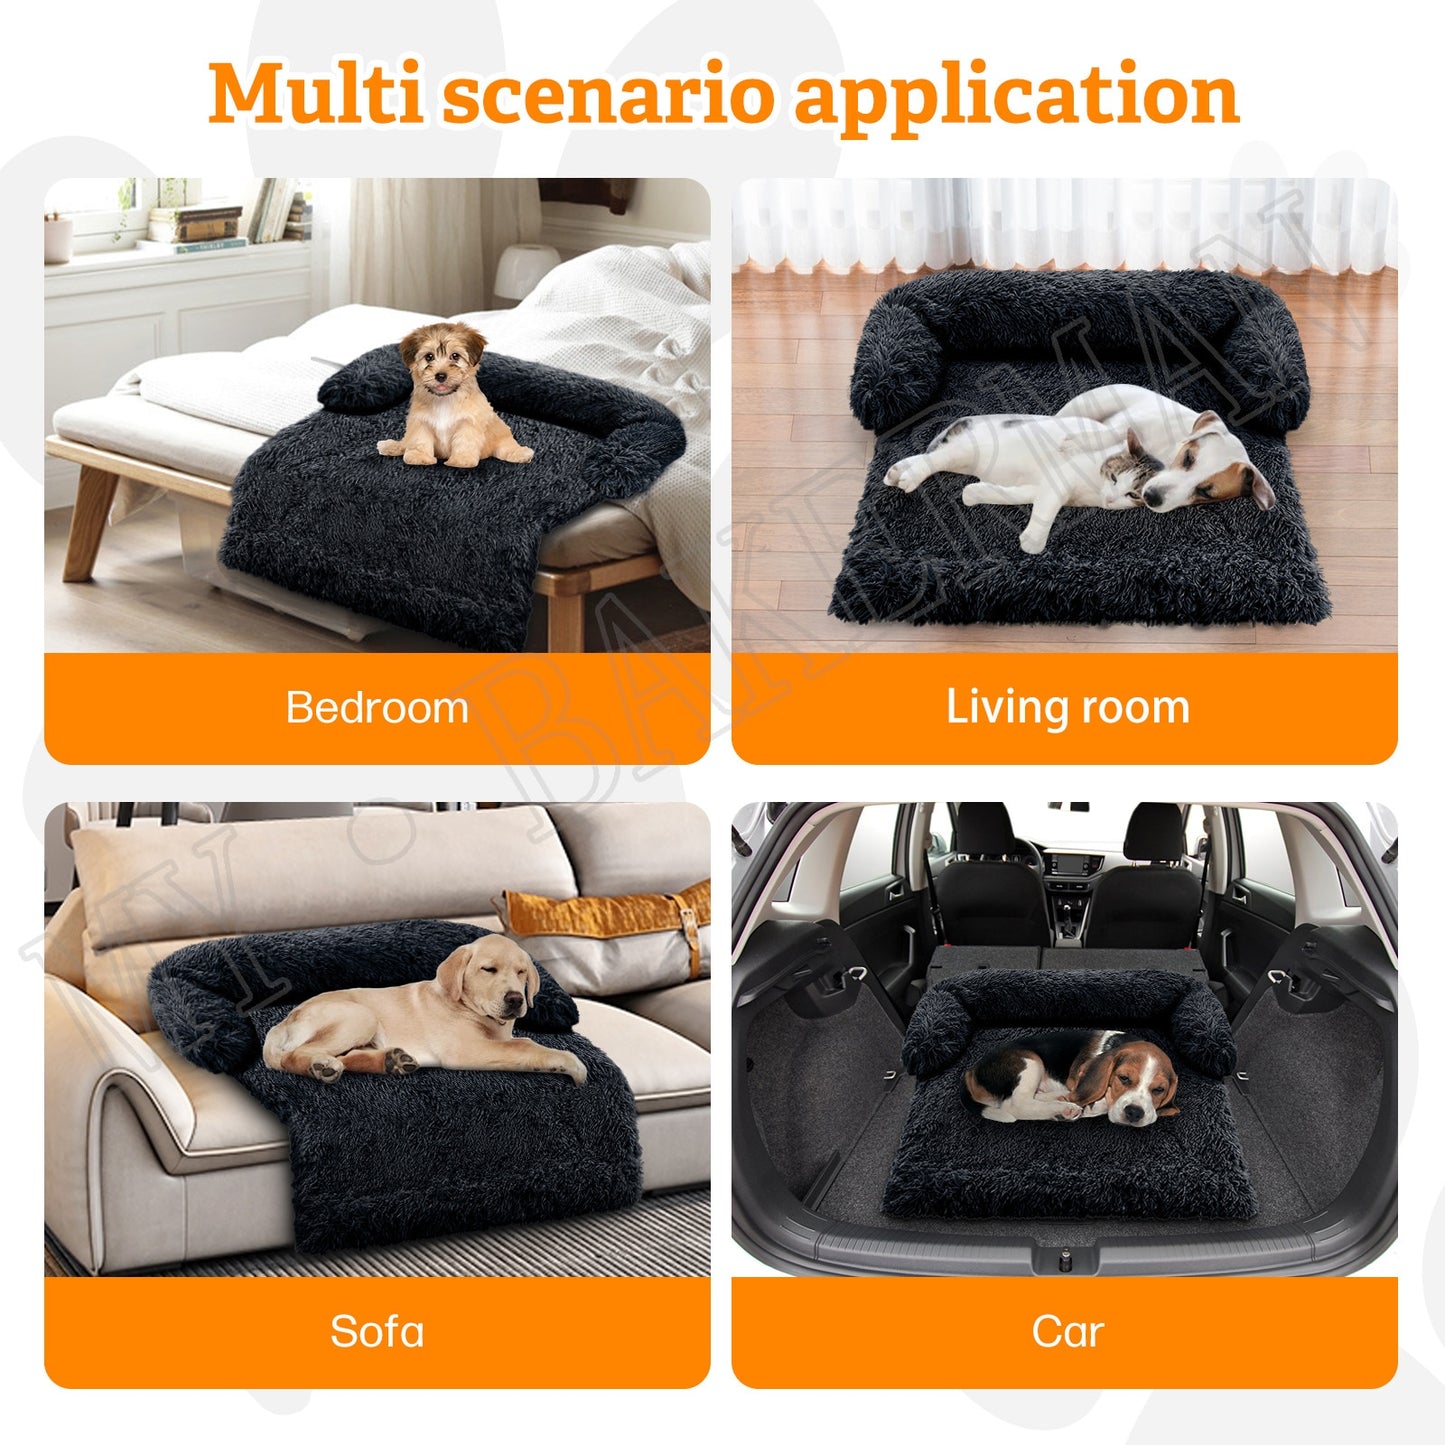 Large Dog Bed Sofa Fluffy Dogs Pet House